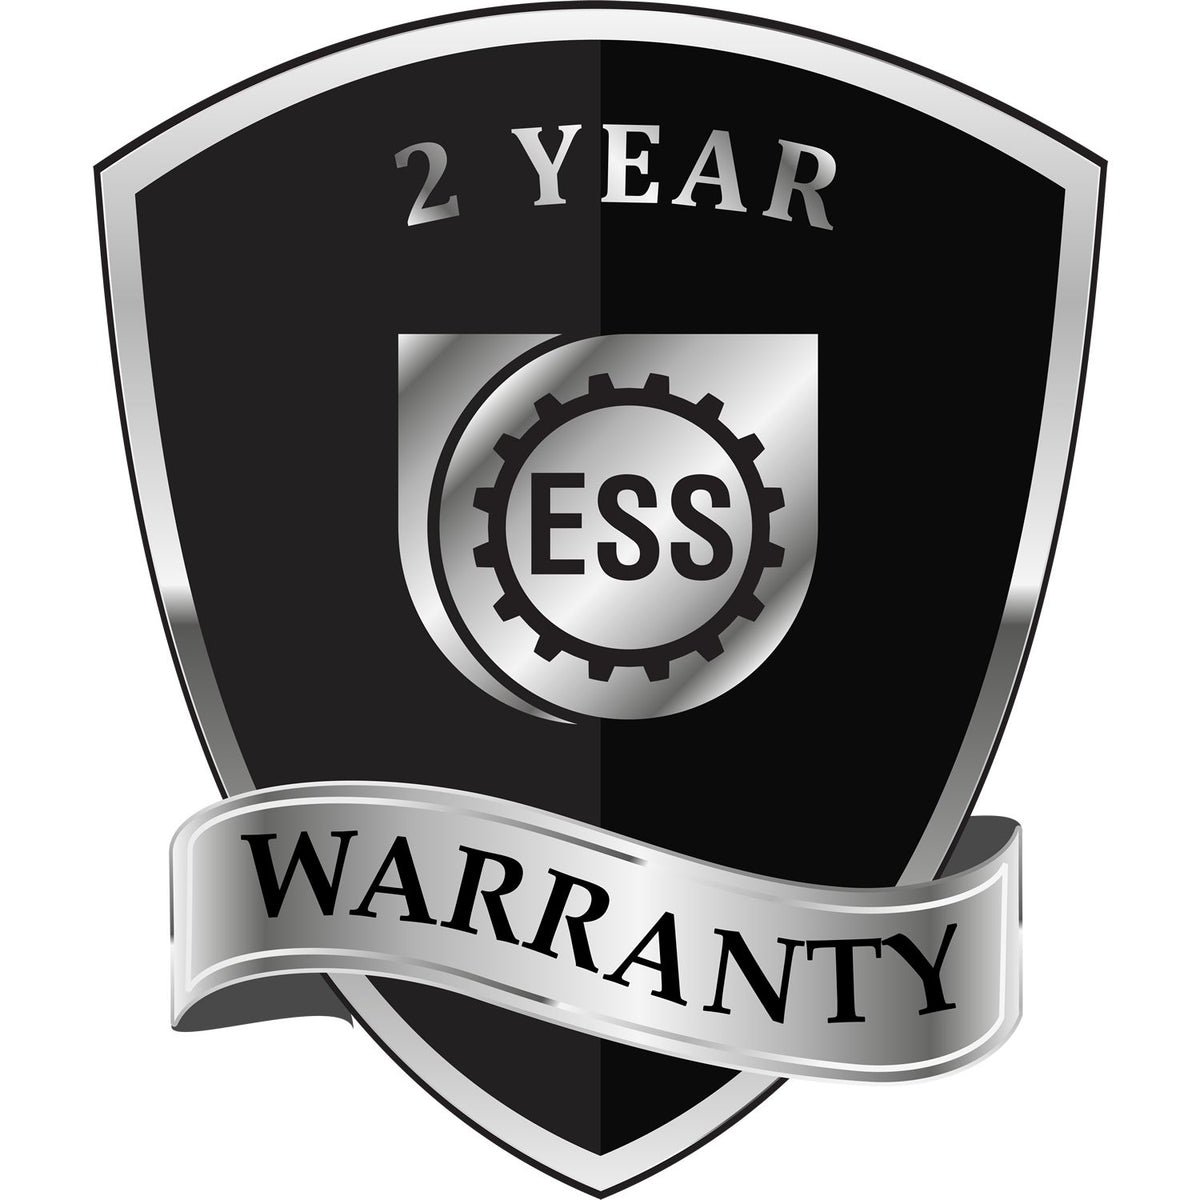 A badge or emblem showing a warranty icon for the State of Nebraska Extended Long Reach Engineer Seal